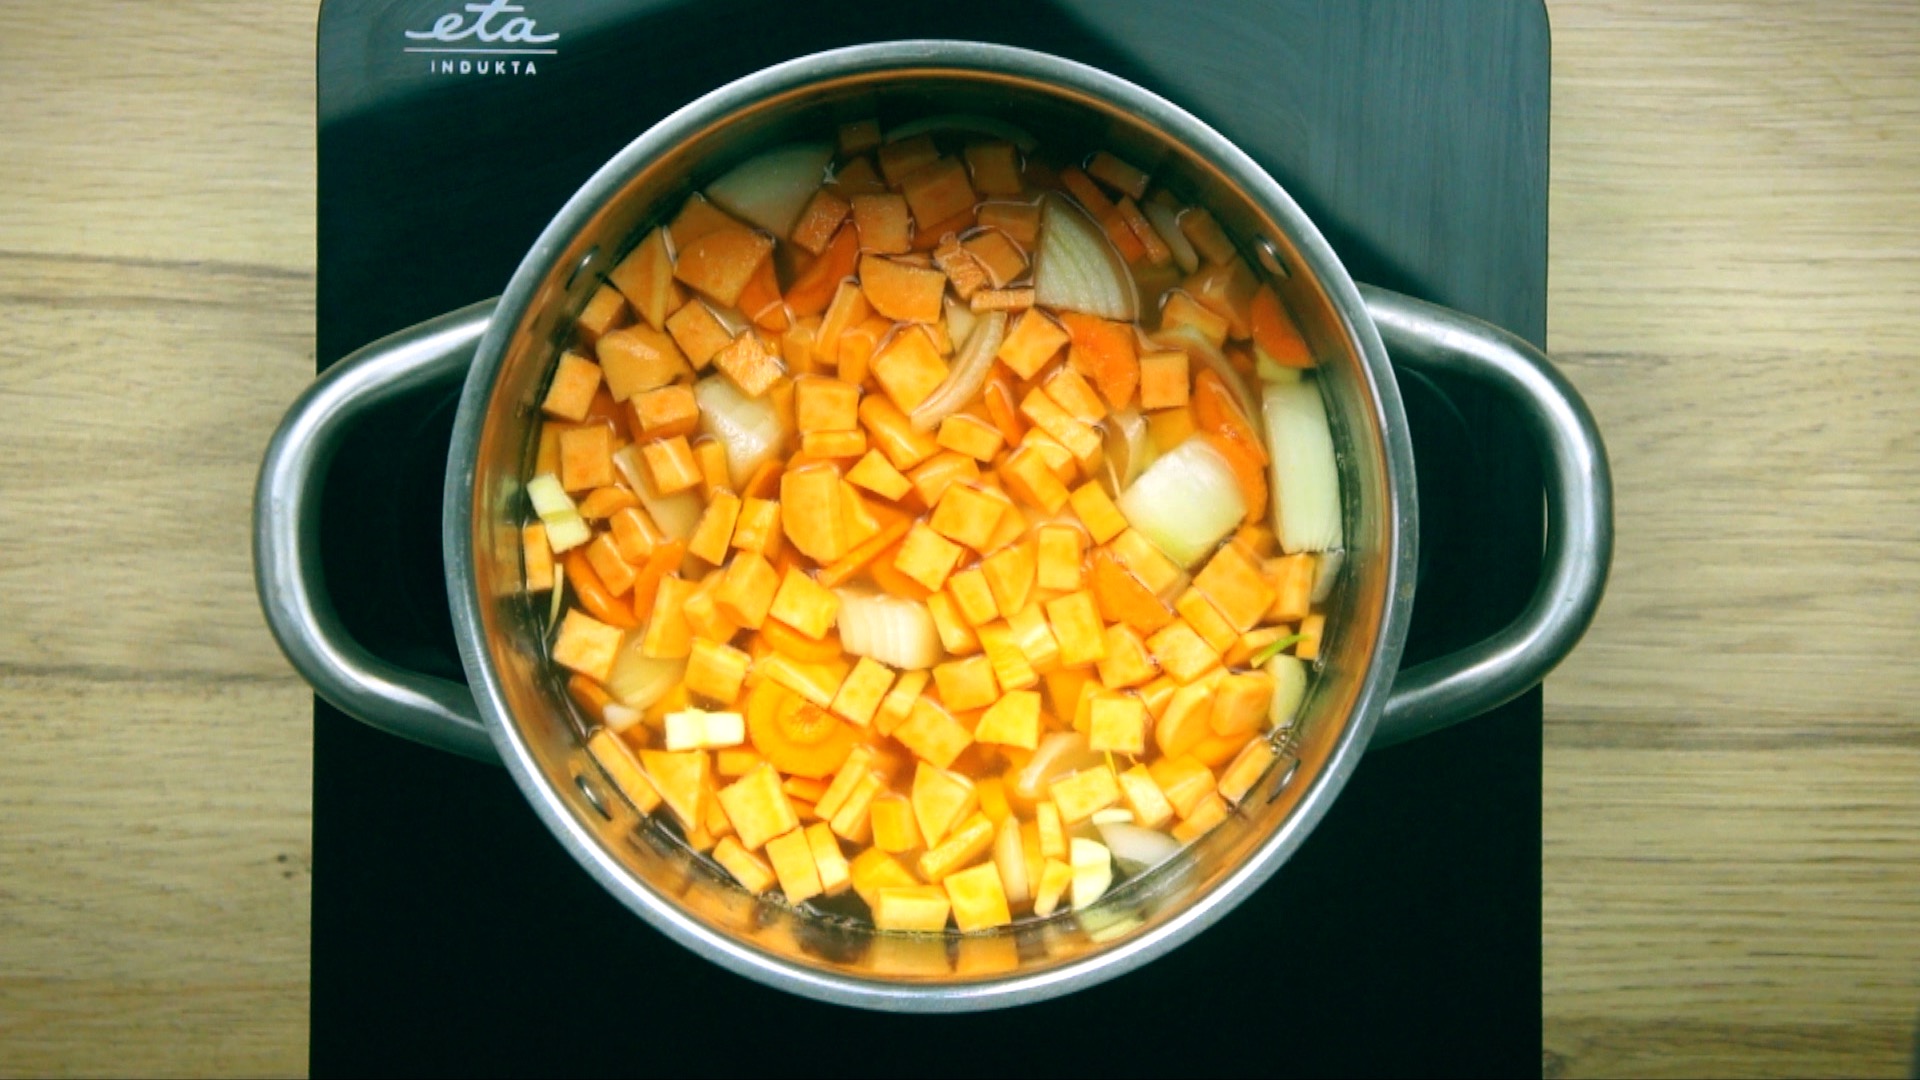 Stockpot with diced carrots, potatoes, orange sweet potatoes, onions and garlic in veggie broth.